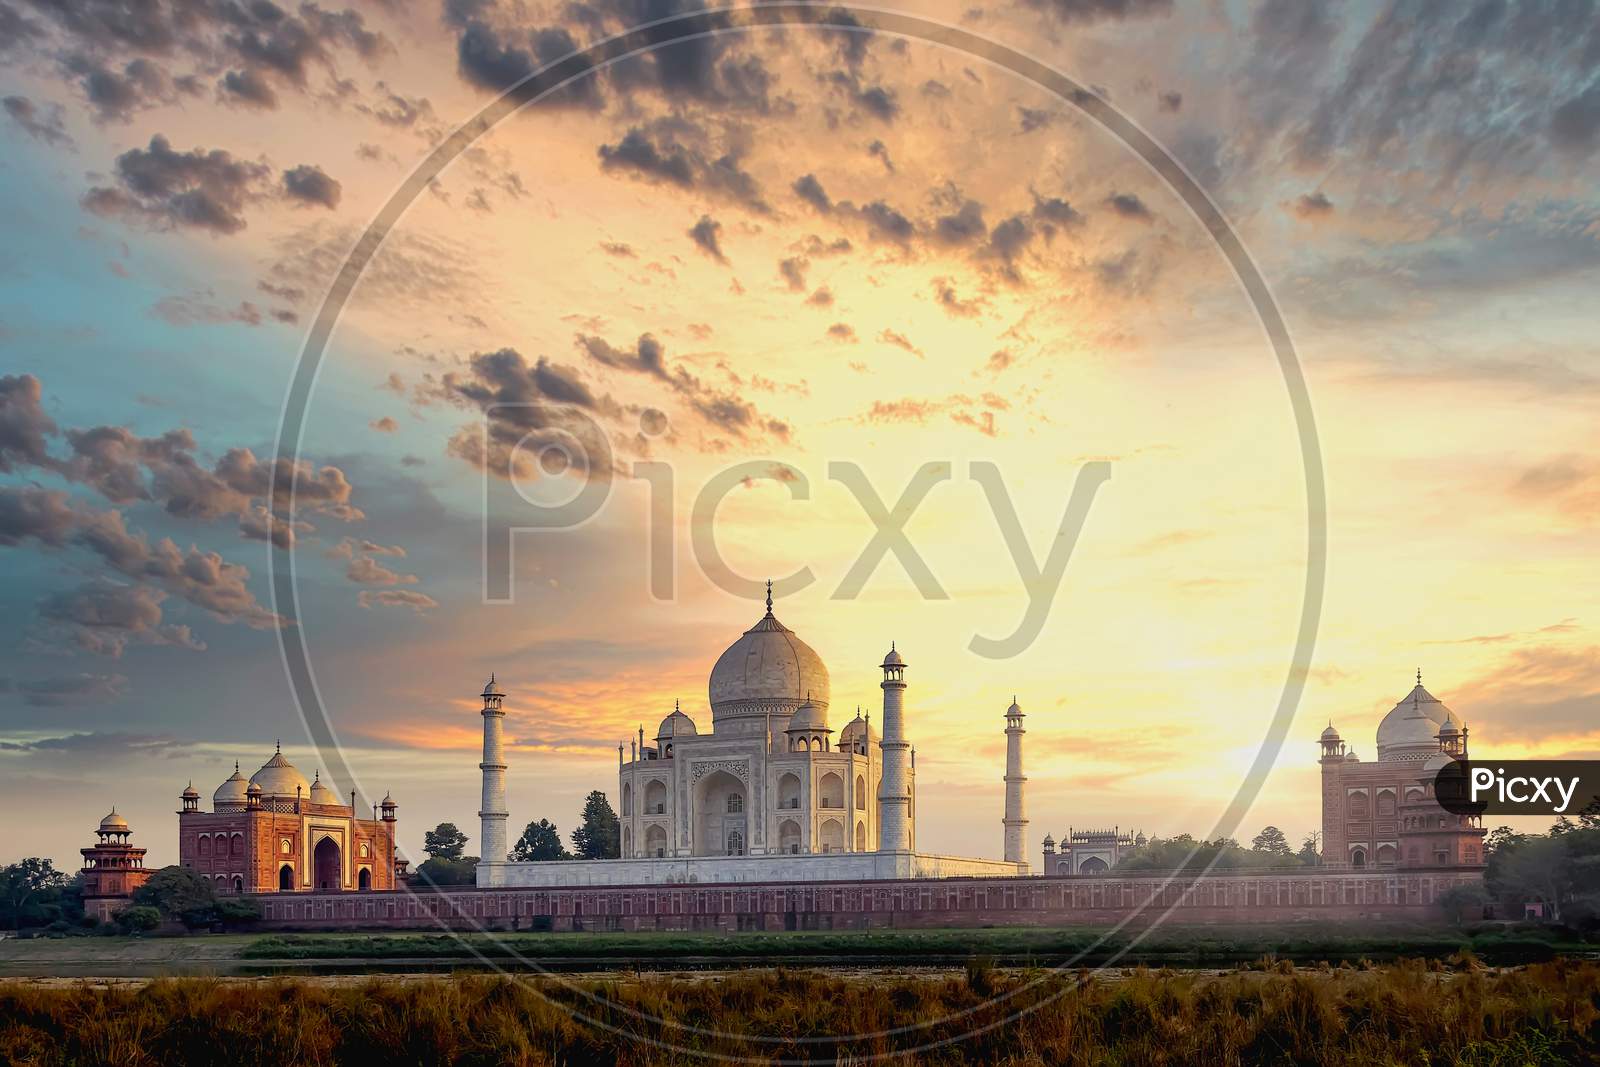 The white marble Taj Mahal building in golden light as seen from inside the red stone mosque in Agra, India